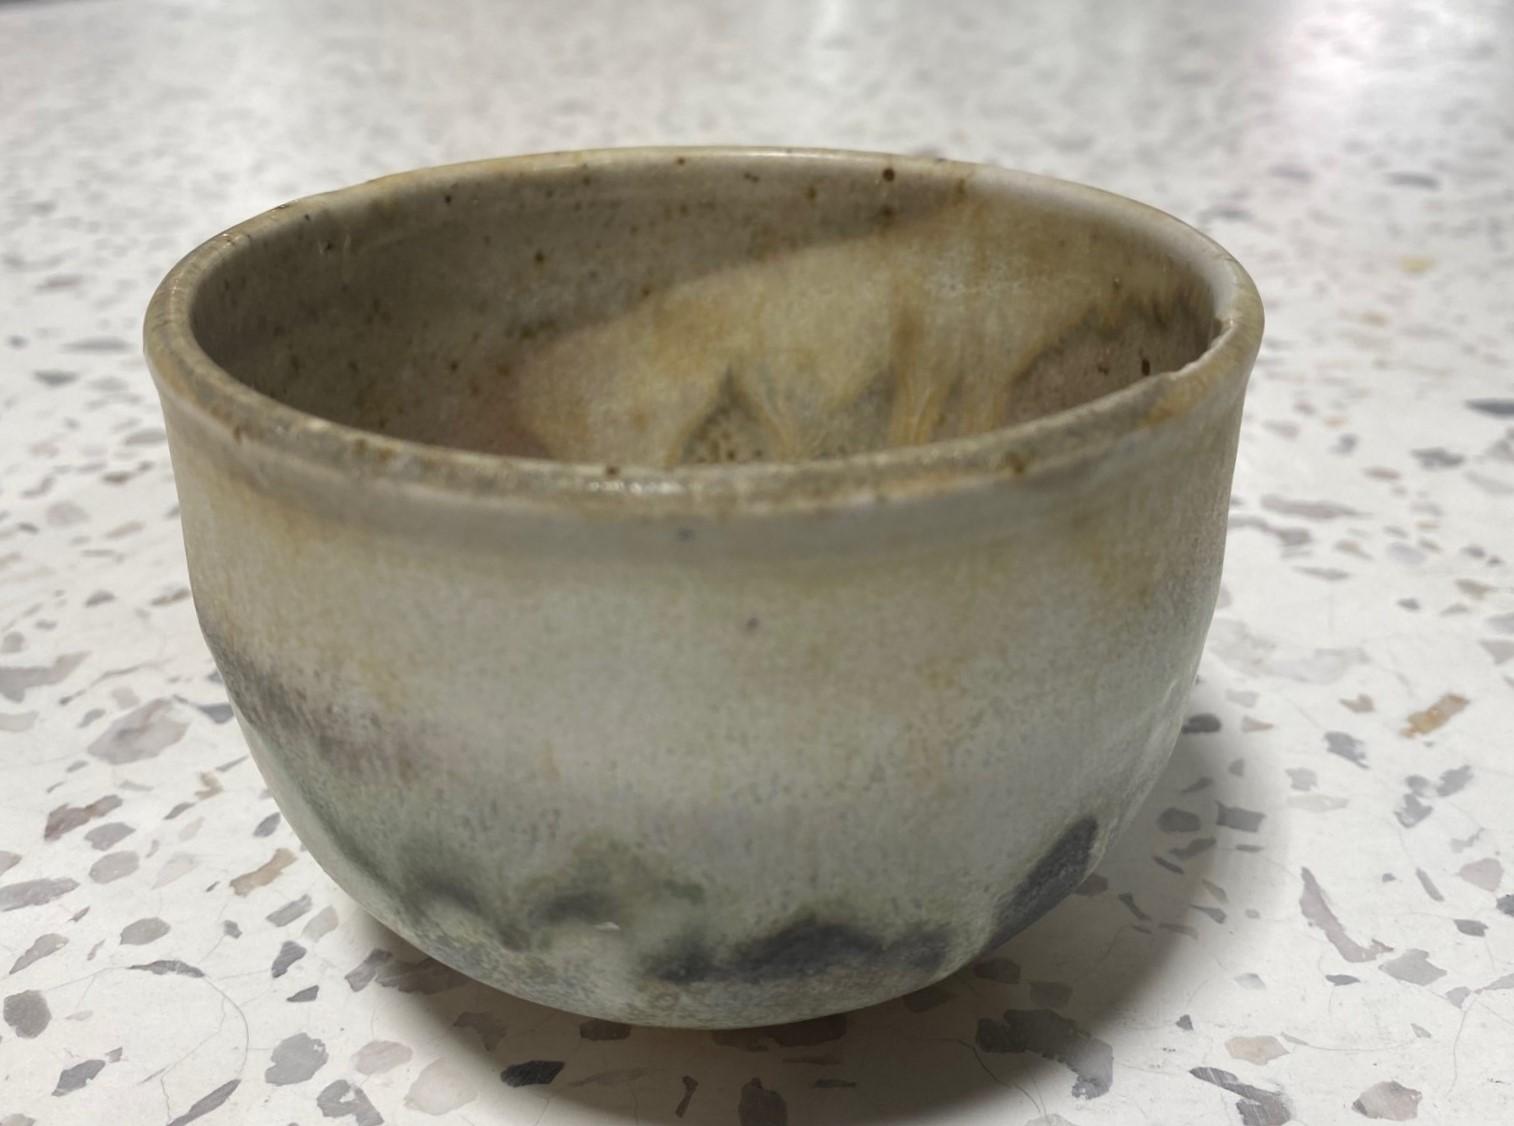 A beautiful and quite engaging Chawan tea bowl by famed Japanese Hawaiian American pottery master Toshiko Takaezu. The fired bowl features a vast array of shifting, vibrant, and colorful glazes (with earth tones of browns, greens,  black, greys, and